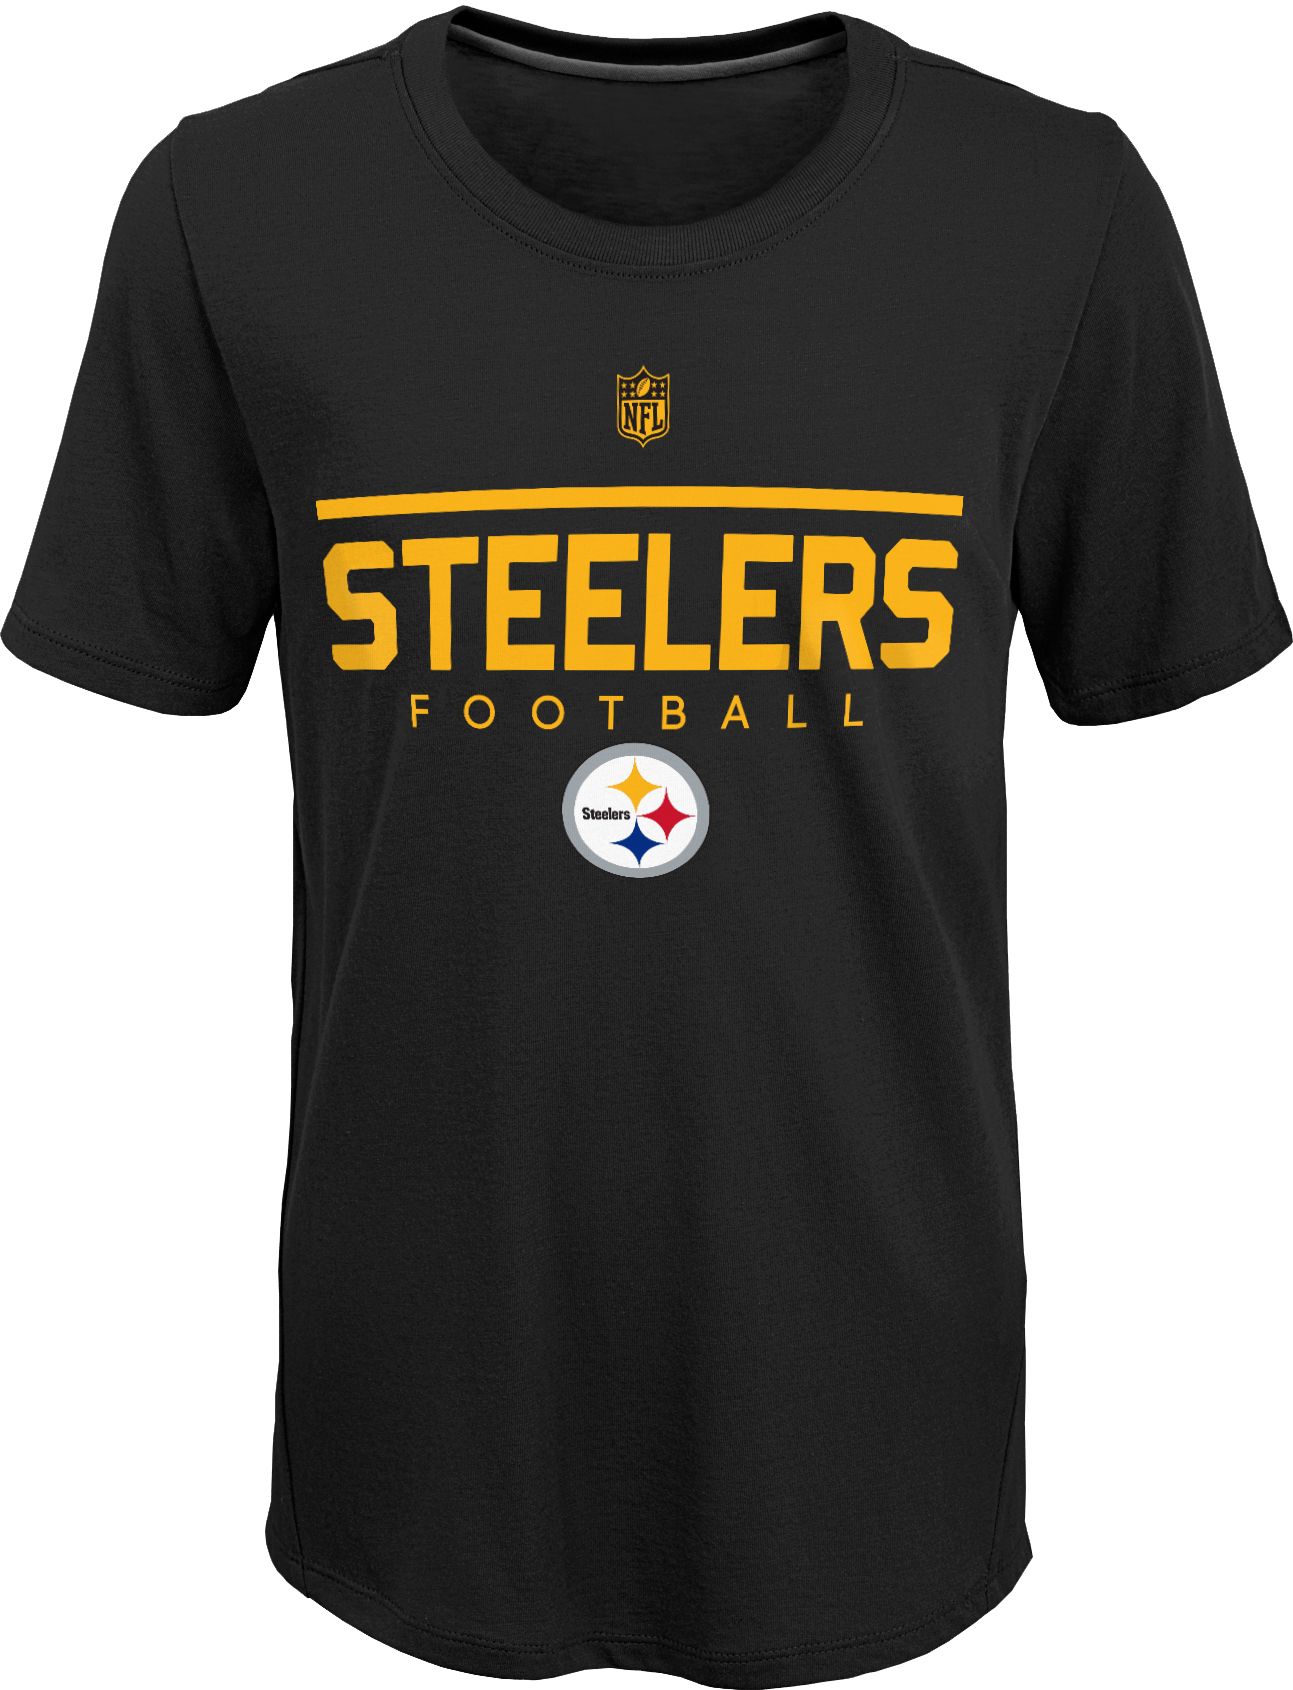 pittsburgh steelers youth apparel